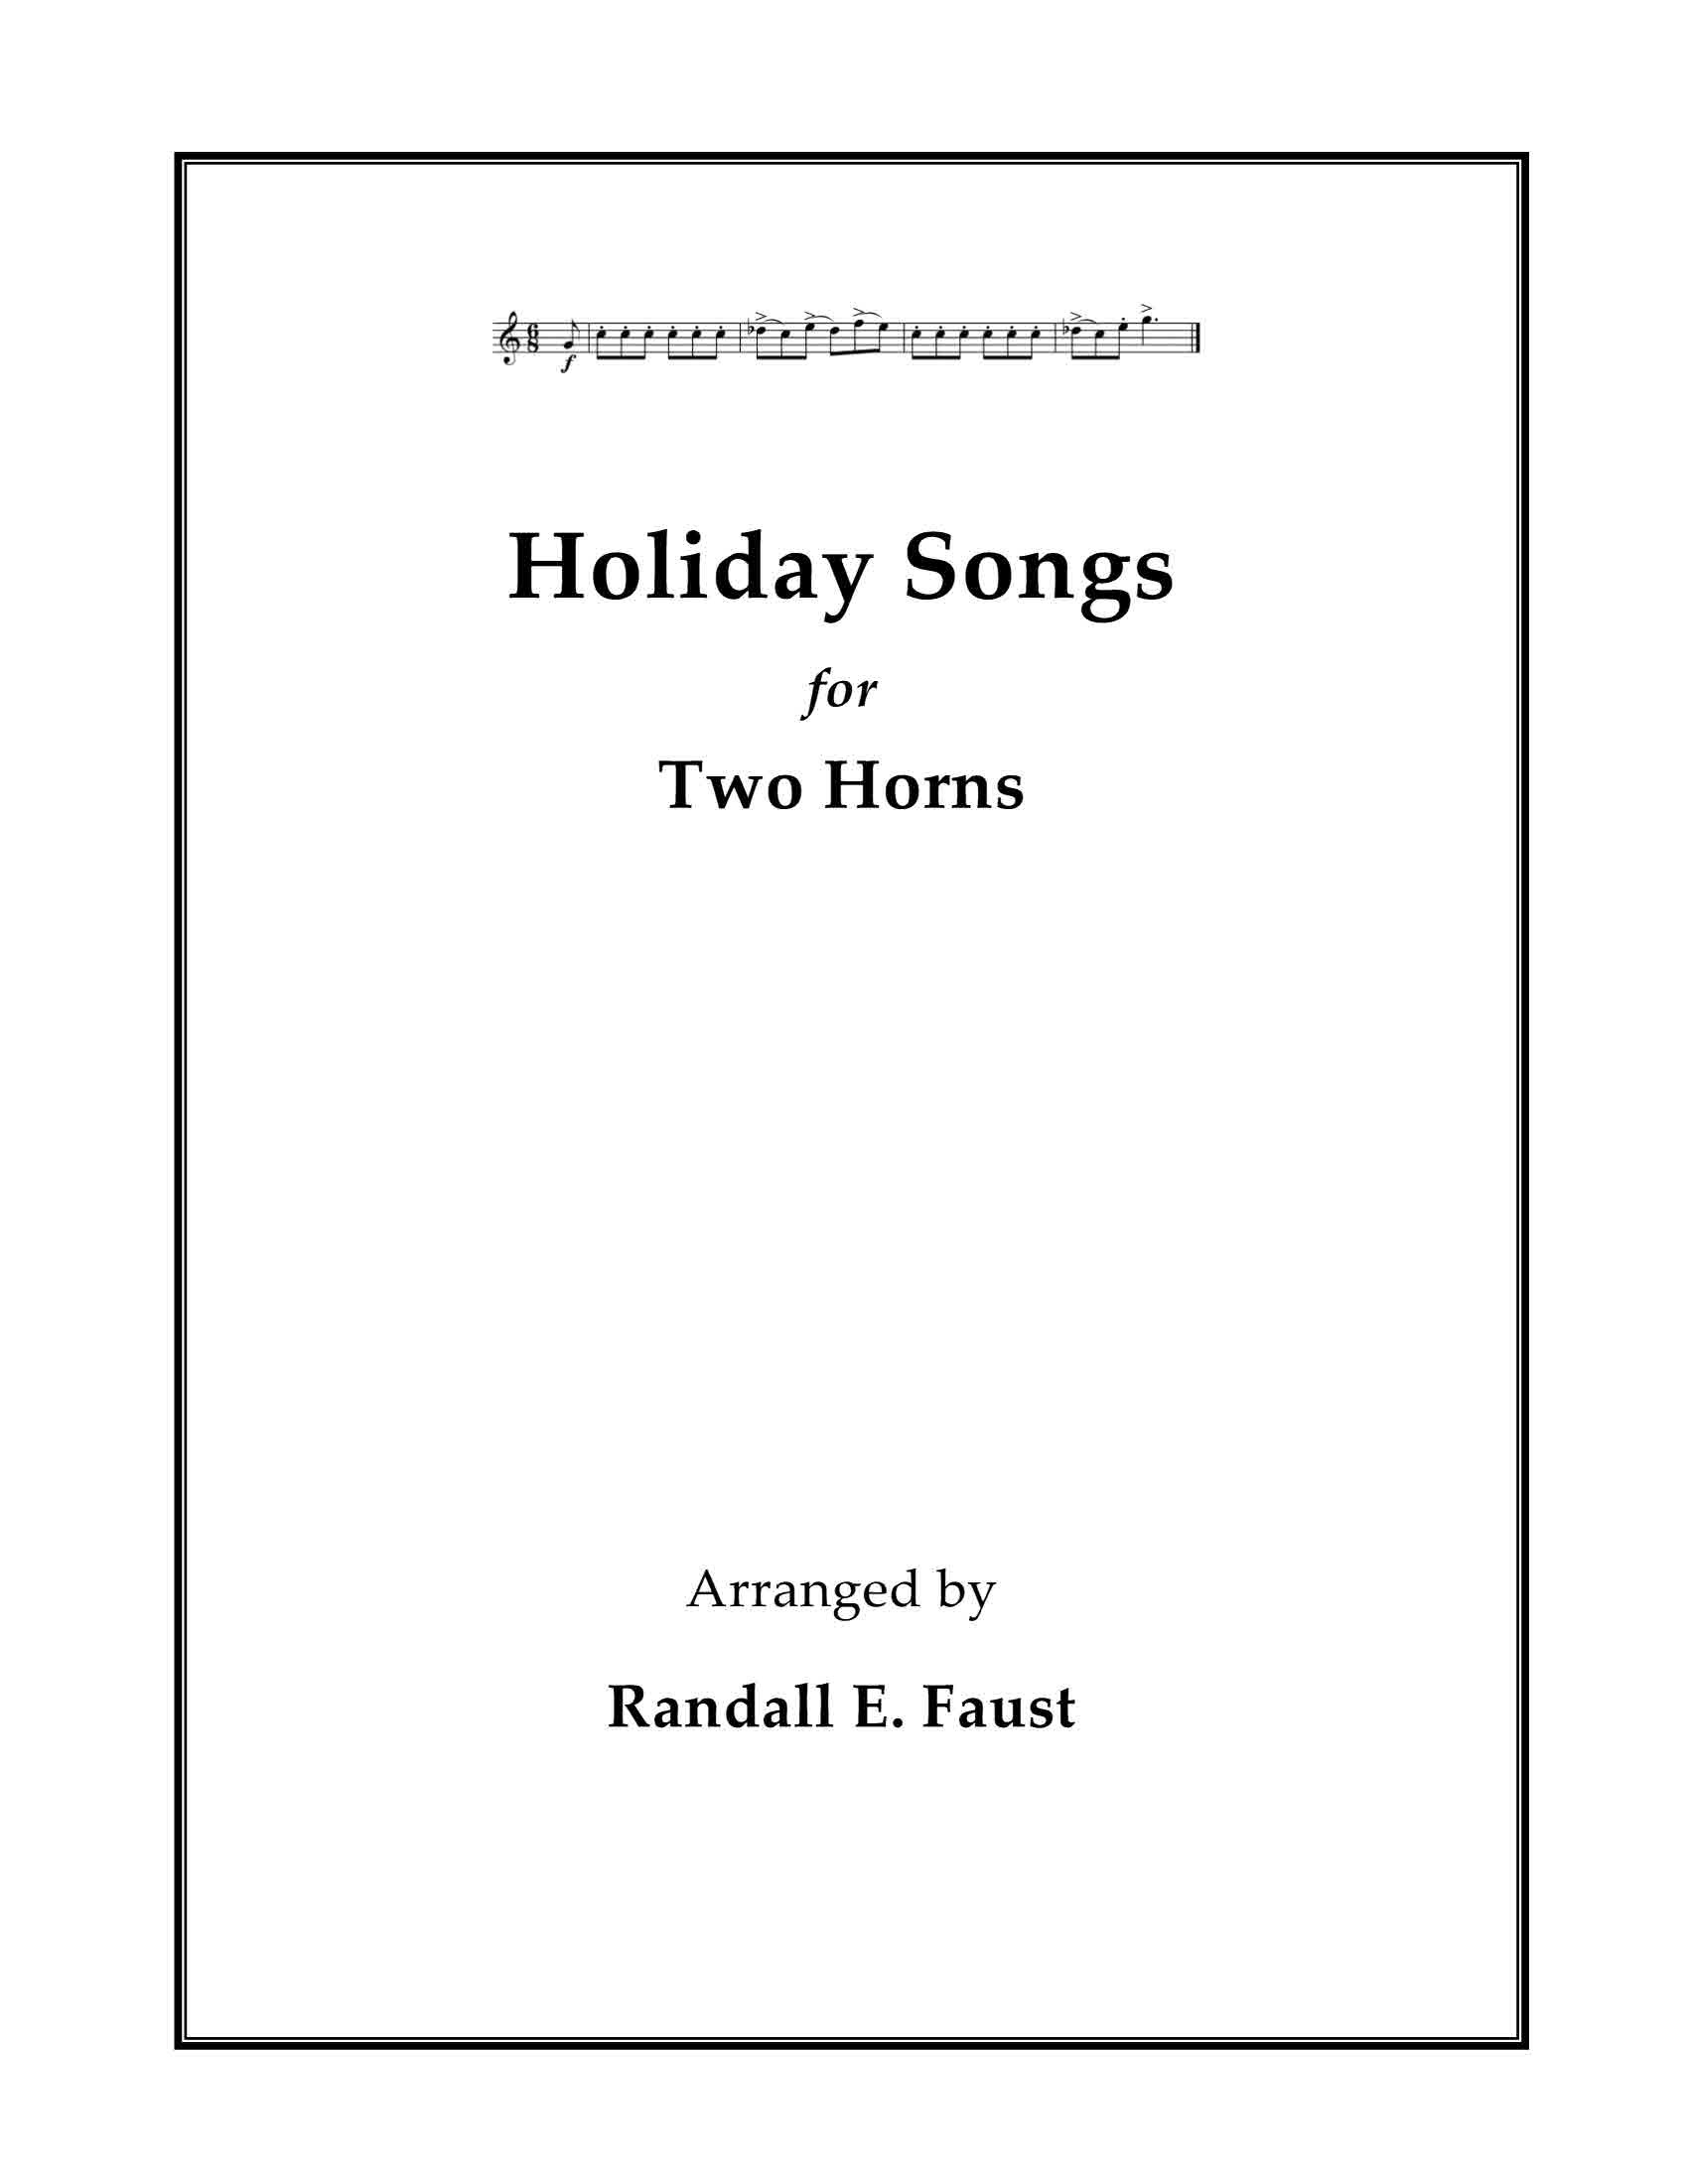 Randall Faust's - Holiday Songs for Two Horns  (2022) Arranged by Randall Faust  - PDF Download